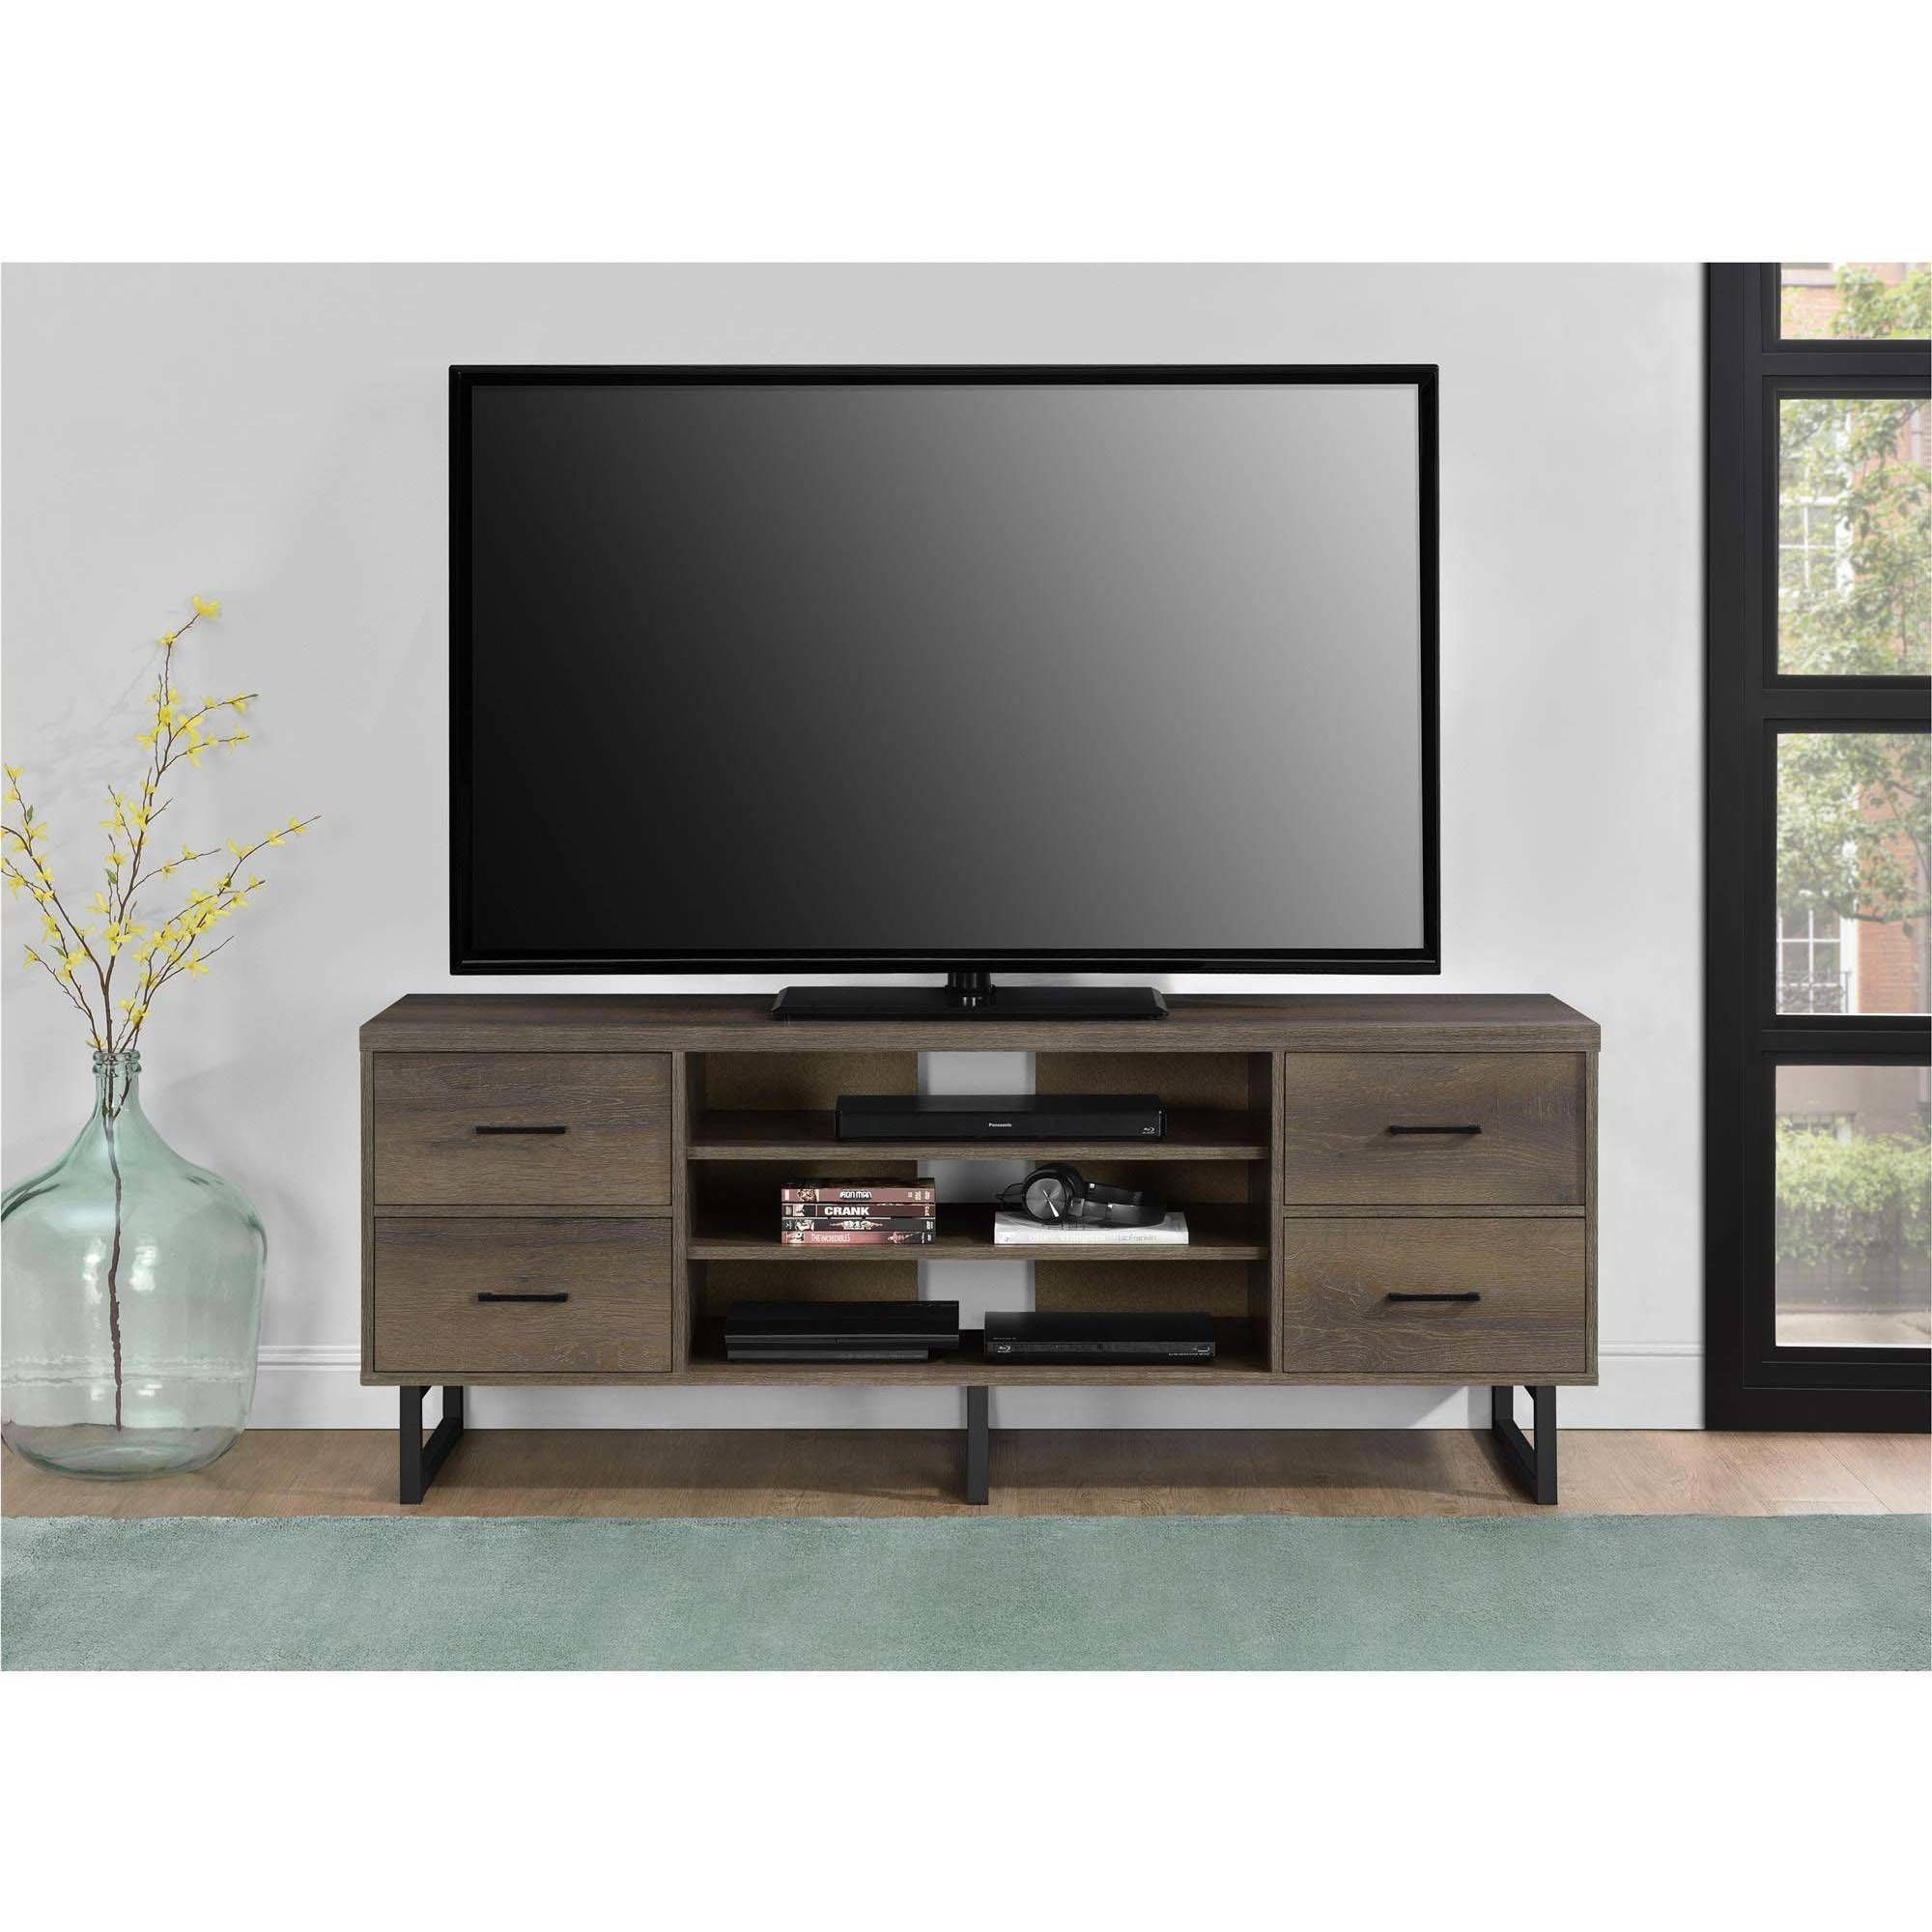 Ameriwood Home Candon Tv Stand With Bins For Tvs Up To 60 Throughout Miah Tv Stands For Tvs Up To 60" (View 10 of 15)